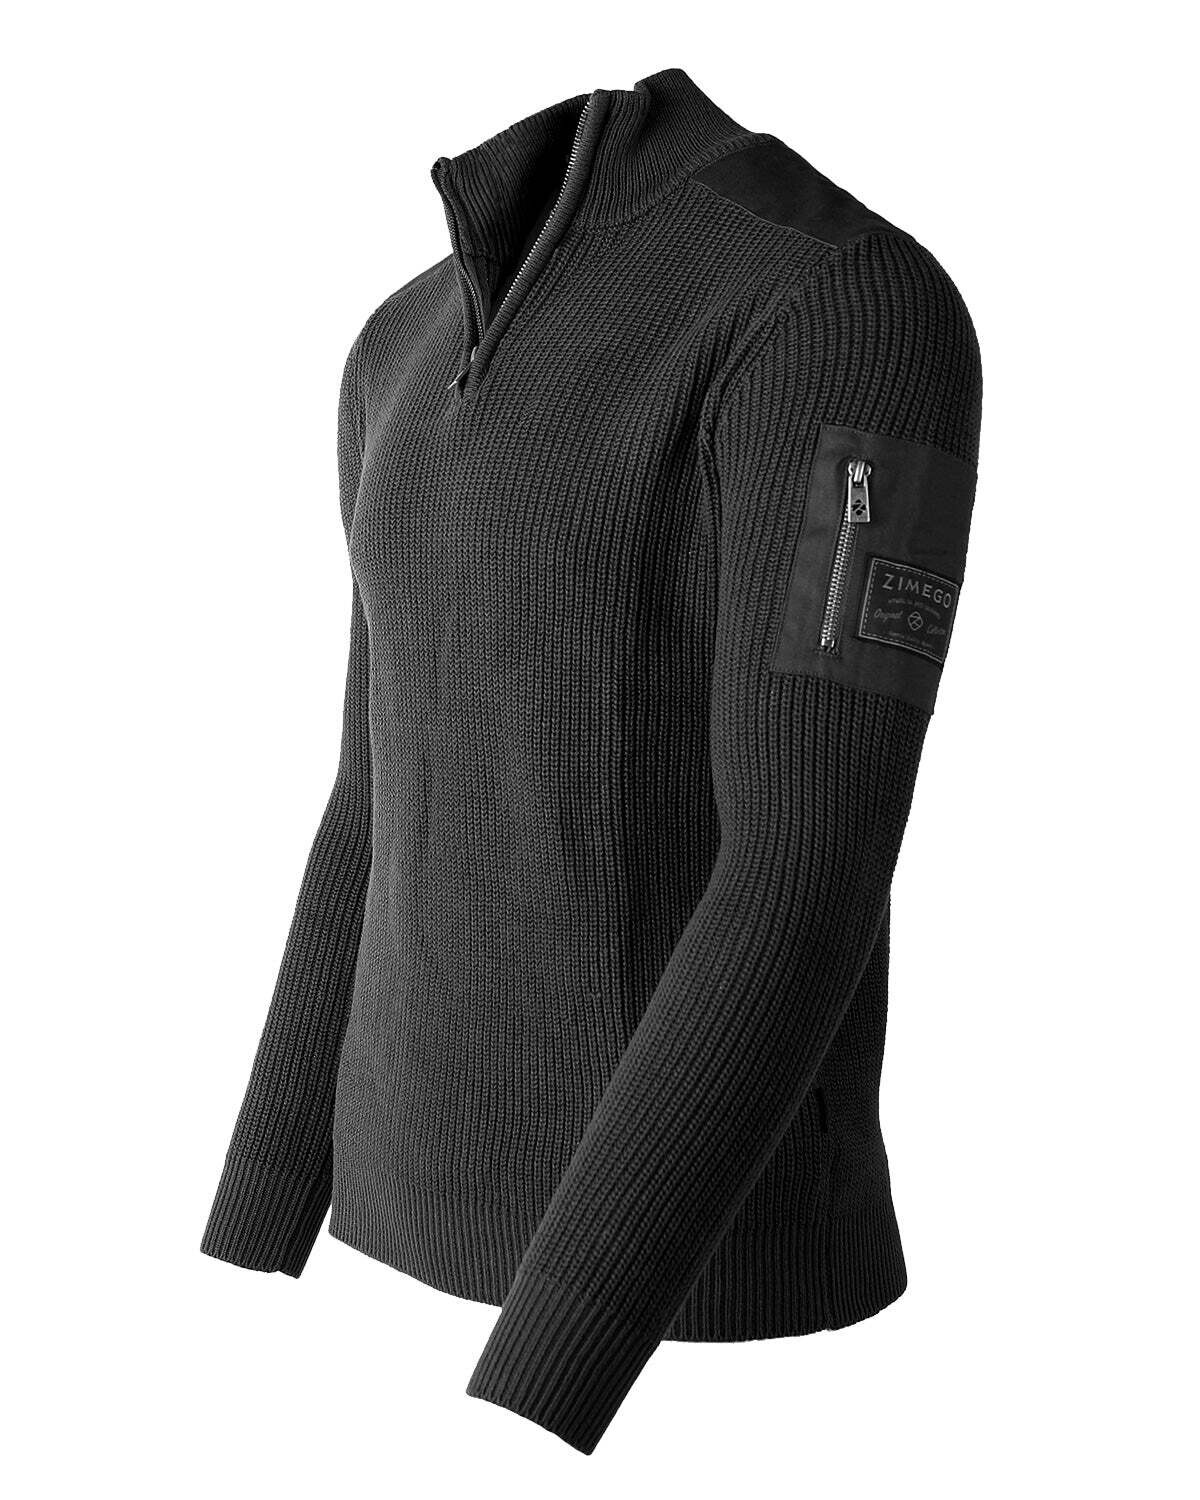 Free 3-day Shipping - ZIMEGO Mens Long Sleeve Pullover Quarter Zip Mock Neck Polo Sweater